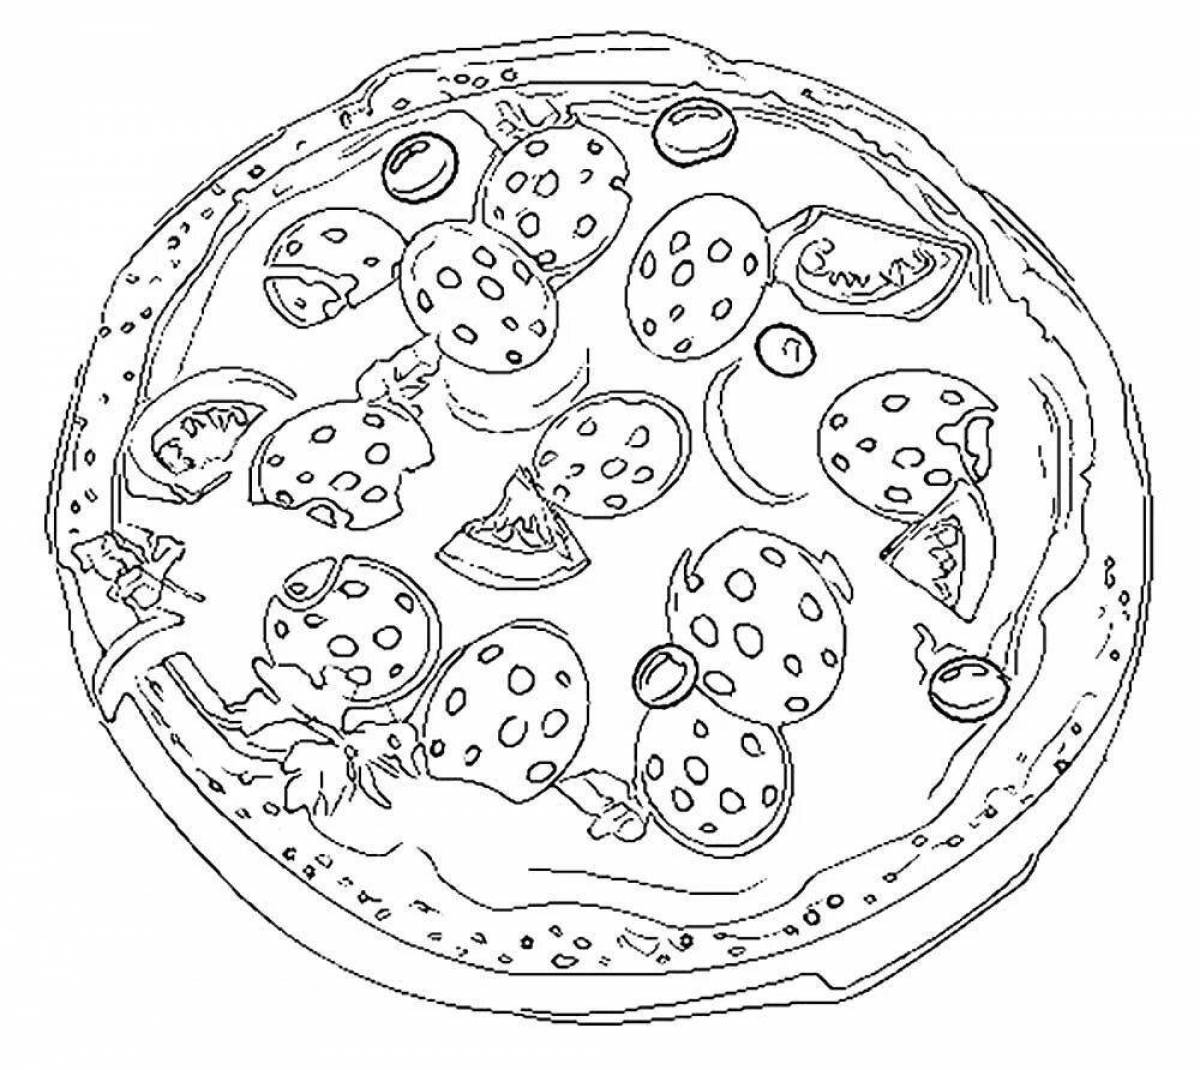 Cute pizzeria coloring page